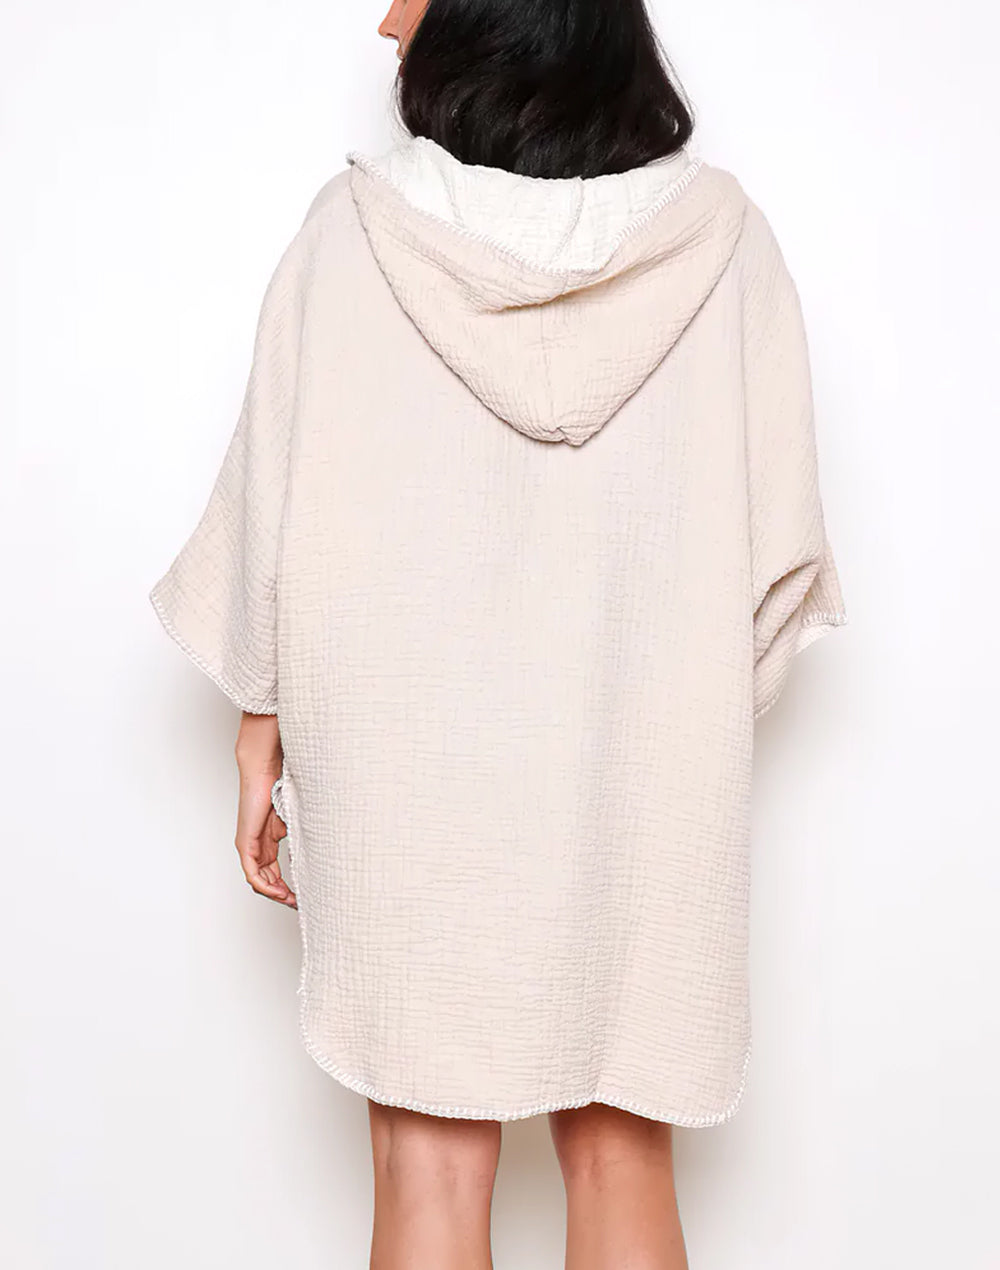 Women's Cocoon Muslin Poncho Cover Up#color_tan